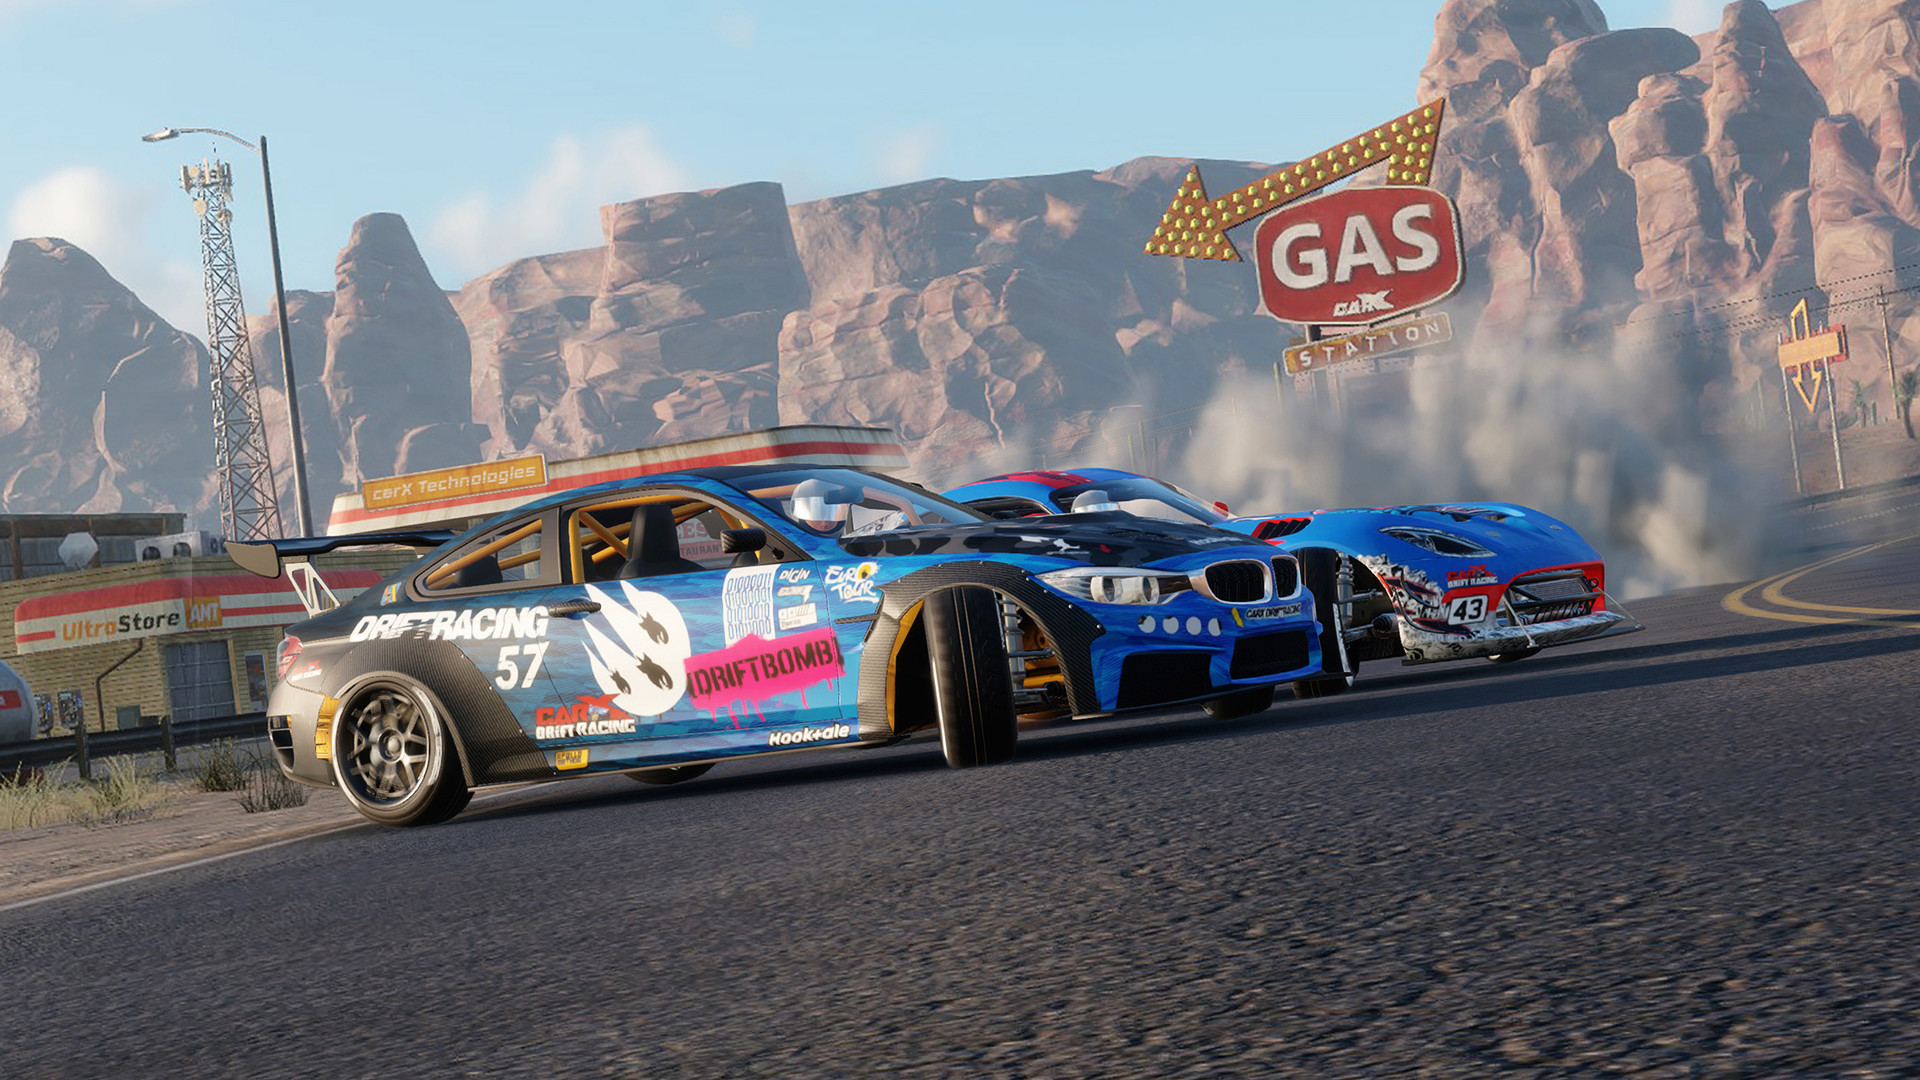 New Games: CARX DRIFT RACING ONLINE (PC, PS4, Xbox One) in 2023